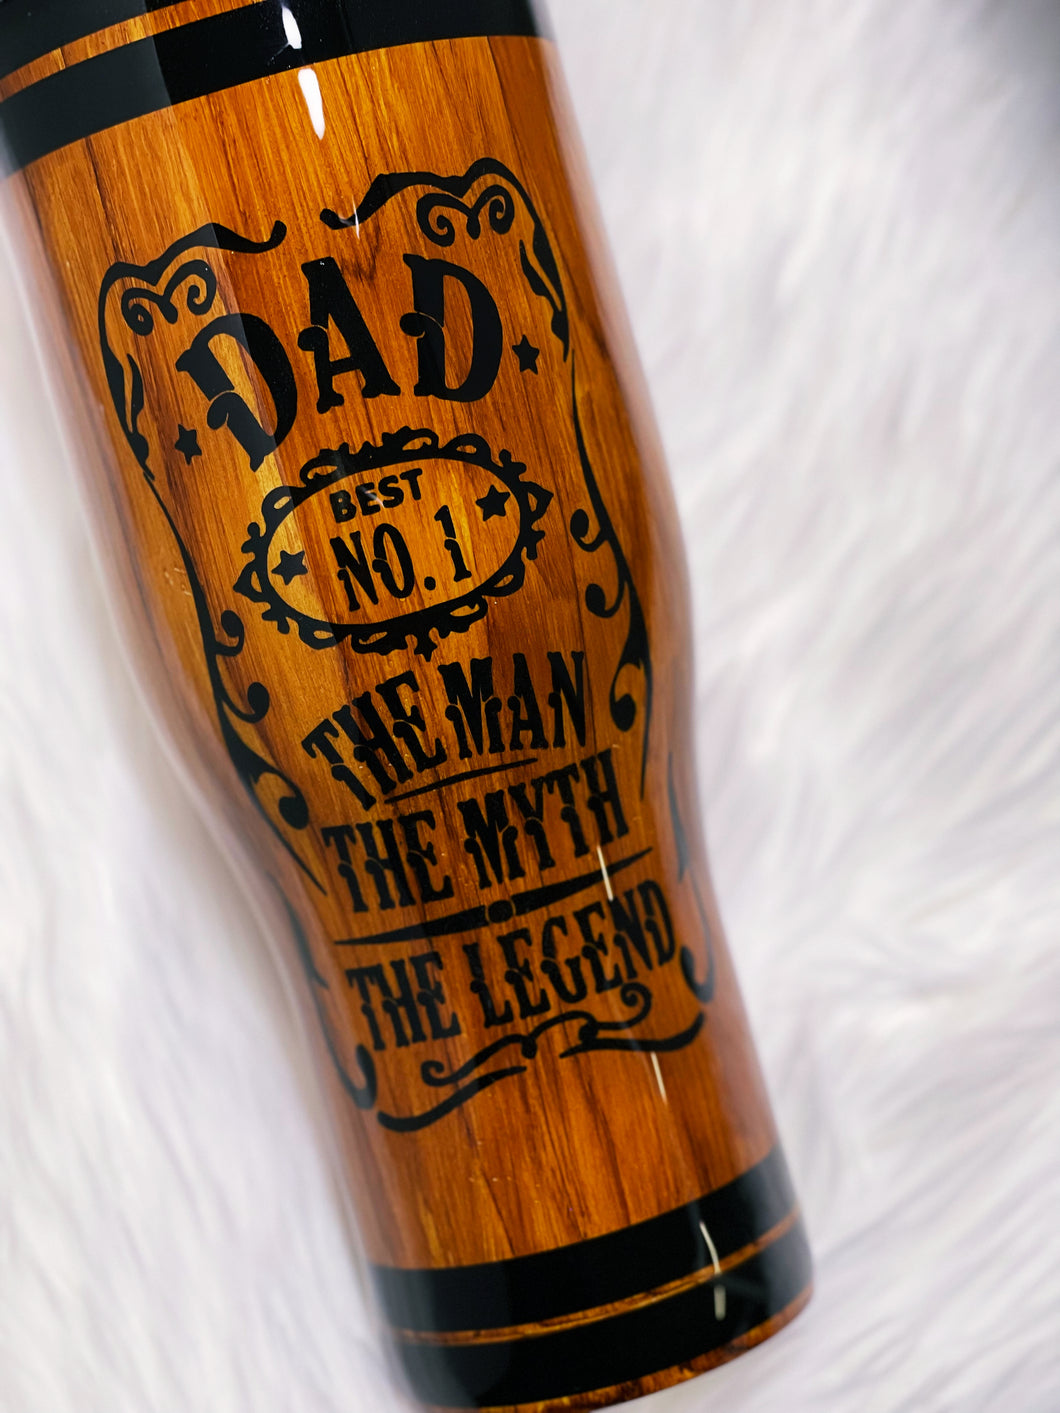 DAD  Bast No. 1 The Man, The Myth, The Legend Custom Woodgrain Look Stainless Steel Tumbler Cup